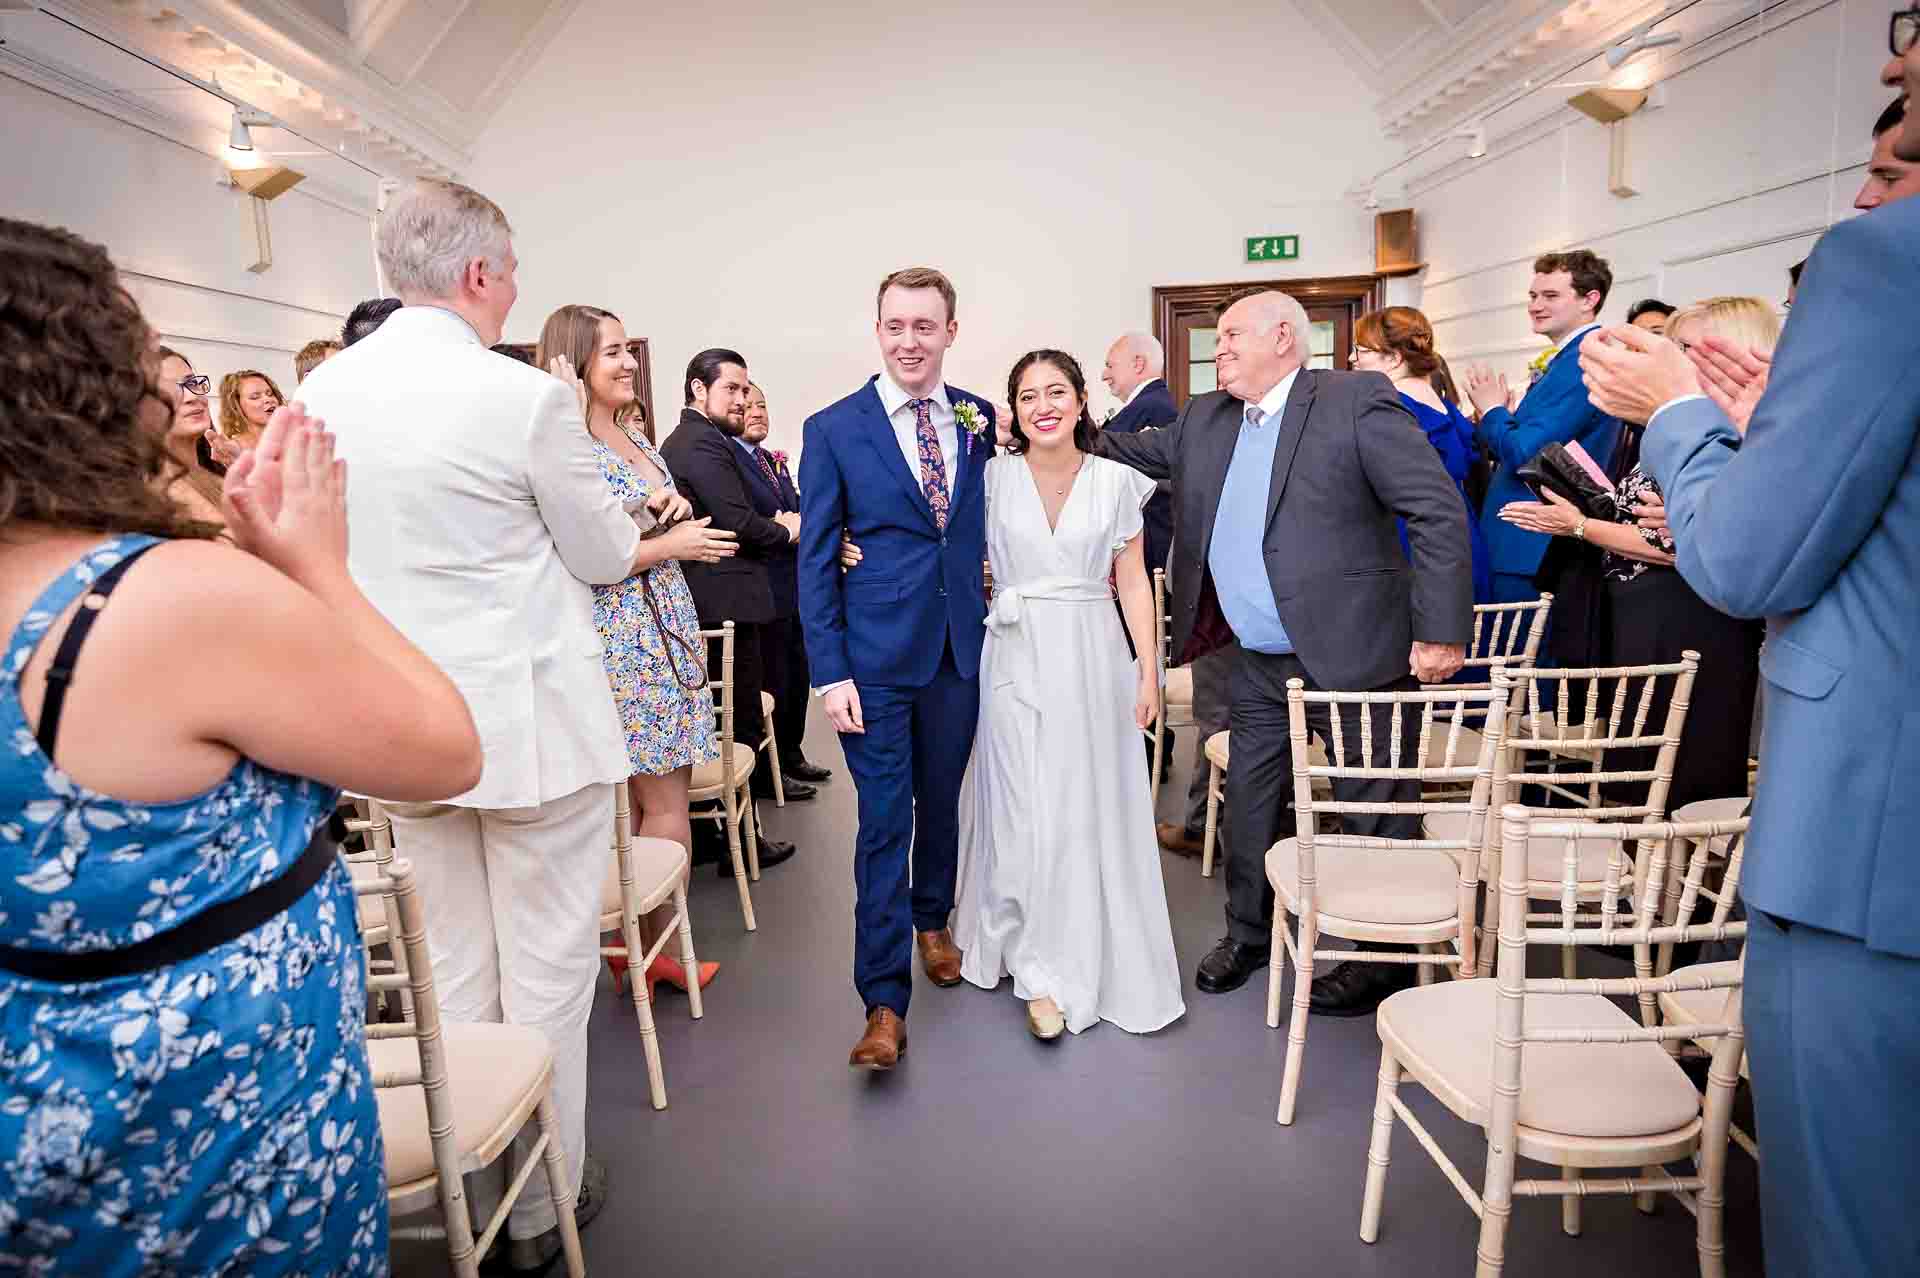 Newly-weds walk down the aisle at Fulham Library after their ceremony